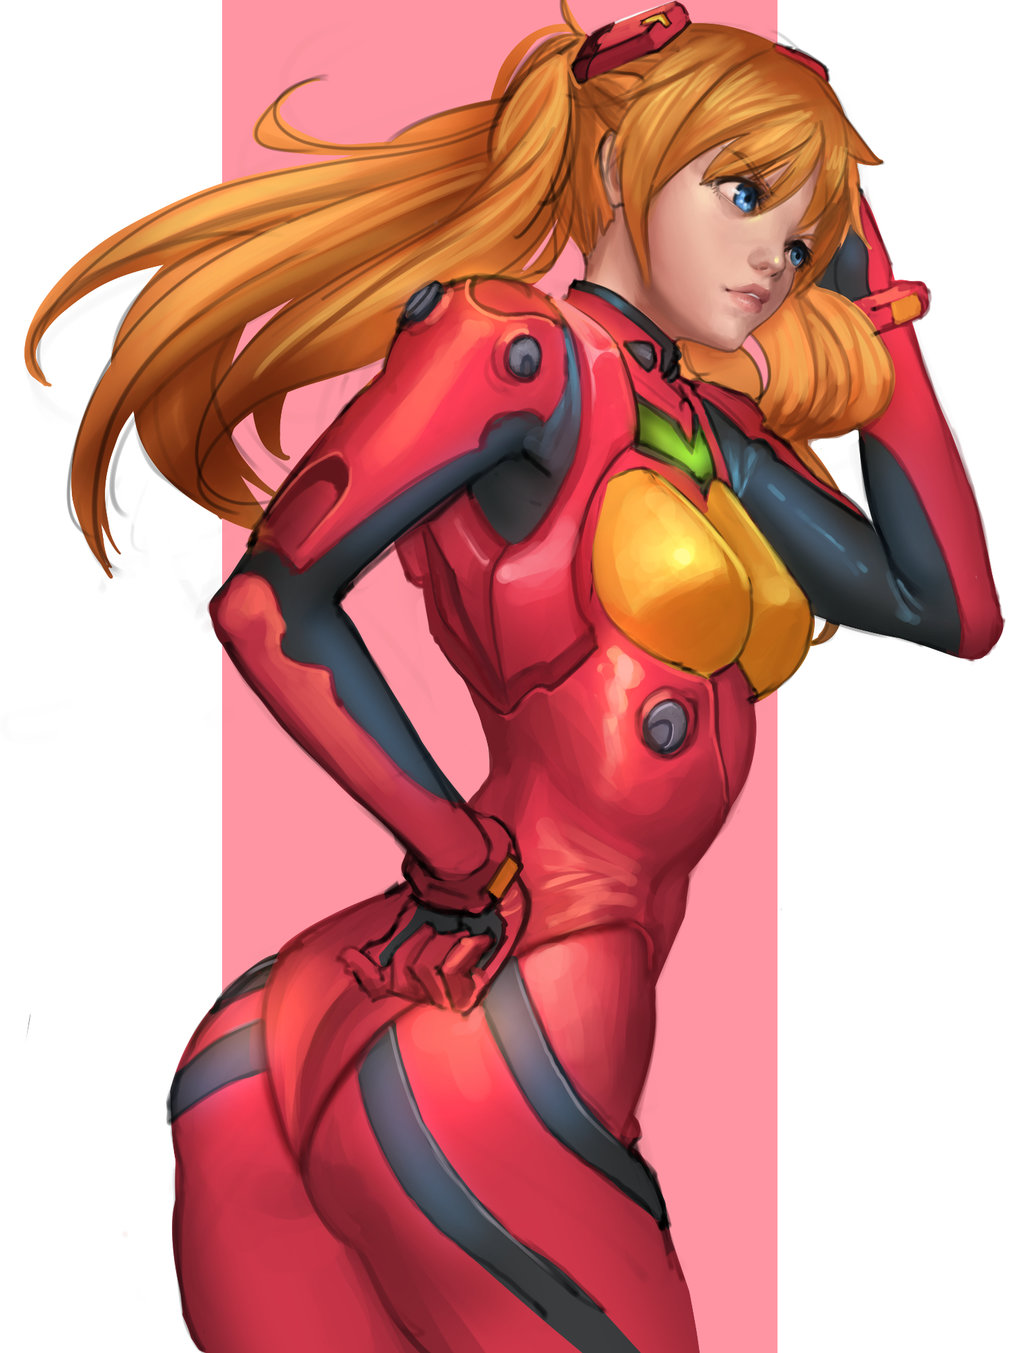 Asuka langley doodle By doghateburger d8fuff7